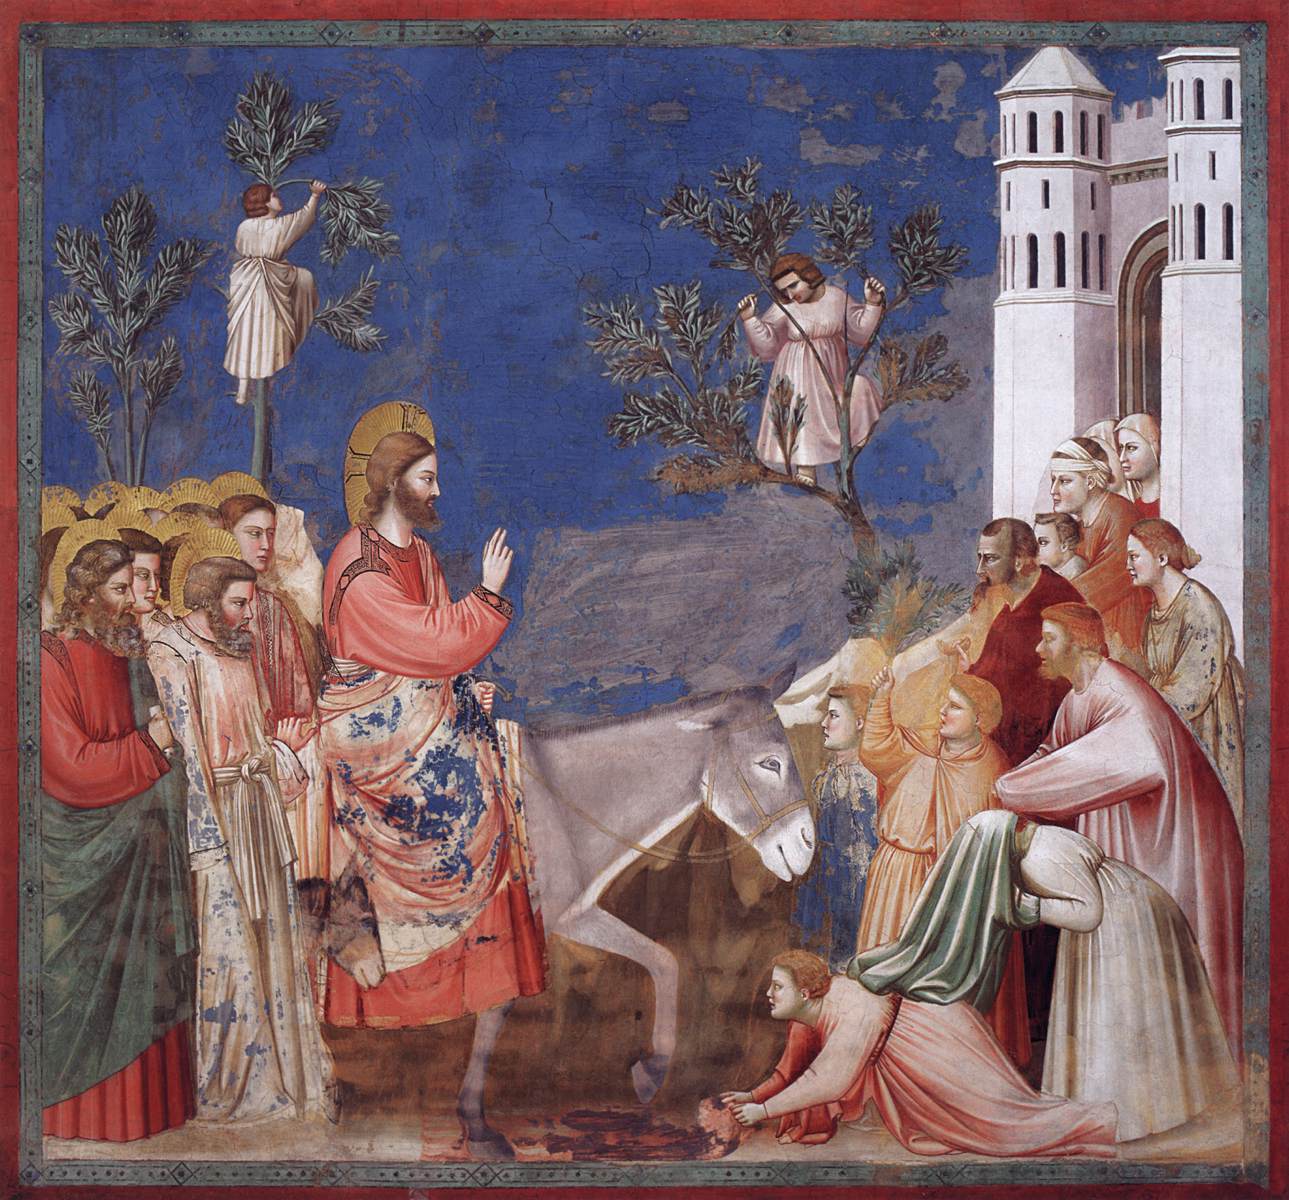 No 26 Scenes from the Life of Christ: 10 Entry into Jerusalem